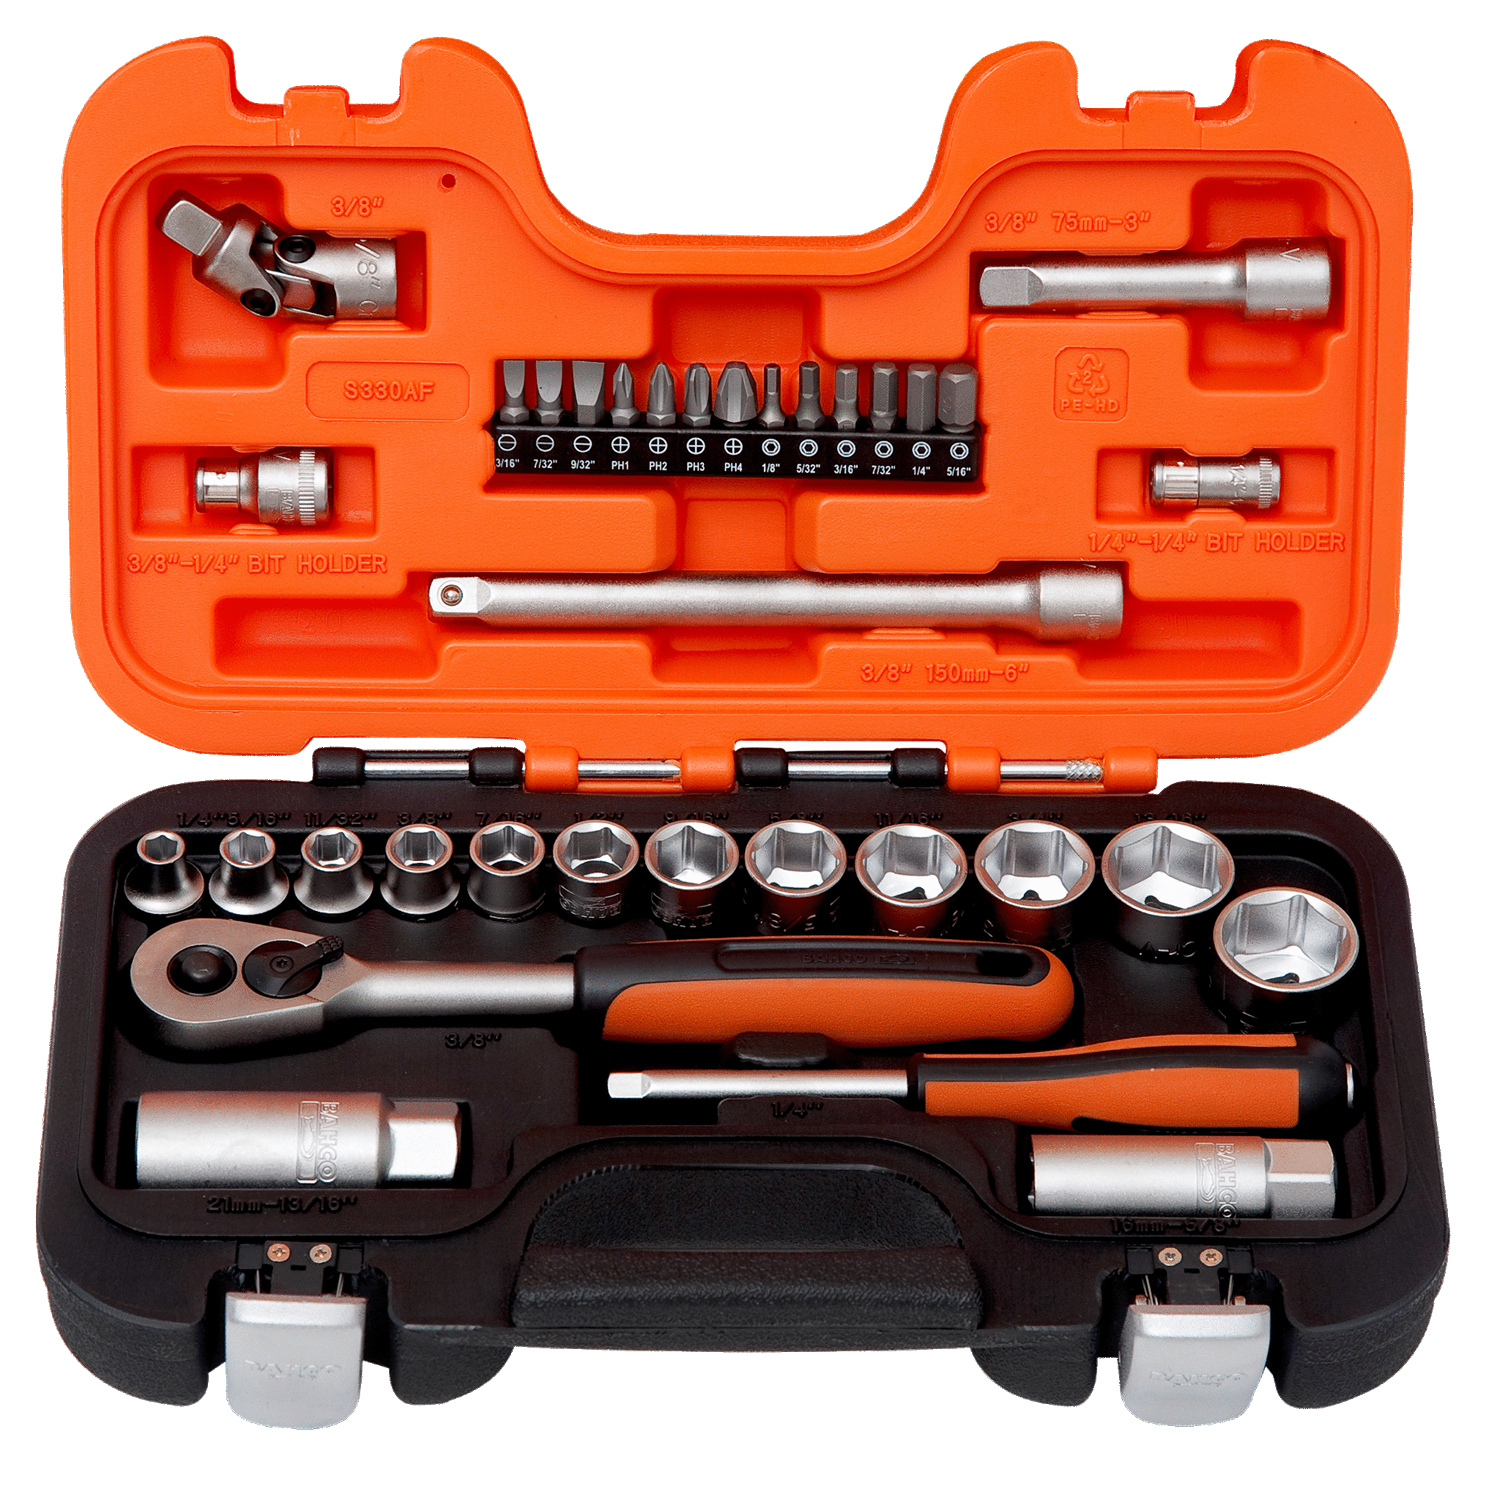 BAHCO S330AF 1/4” And 3/8” Square Drive Socket Set Ratchet - Premium Socket Set from BAHCO - Shop now at Yew Aik.